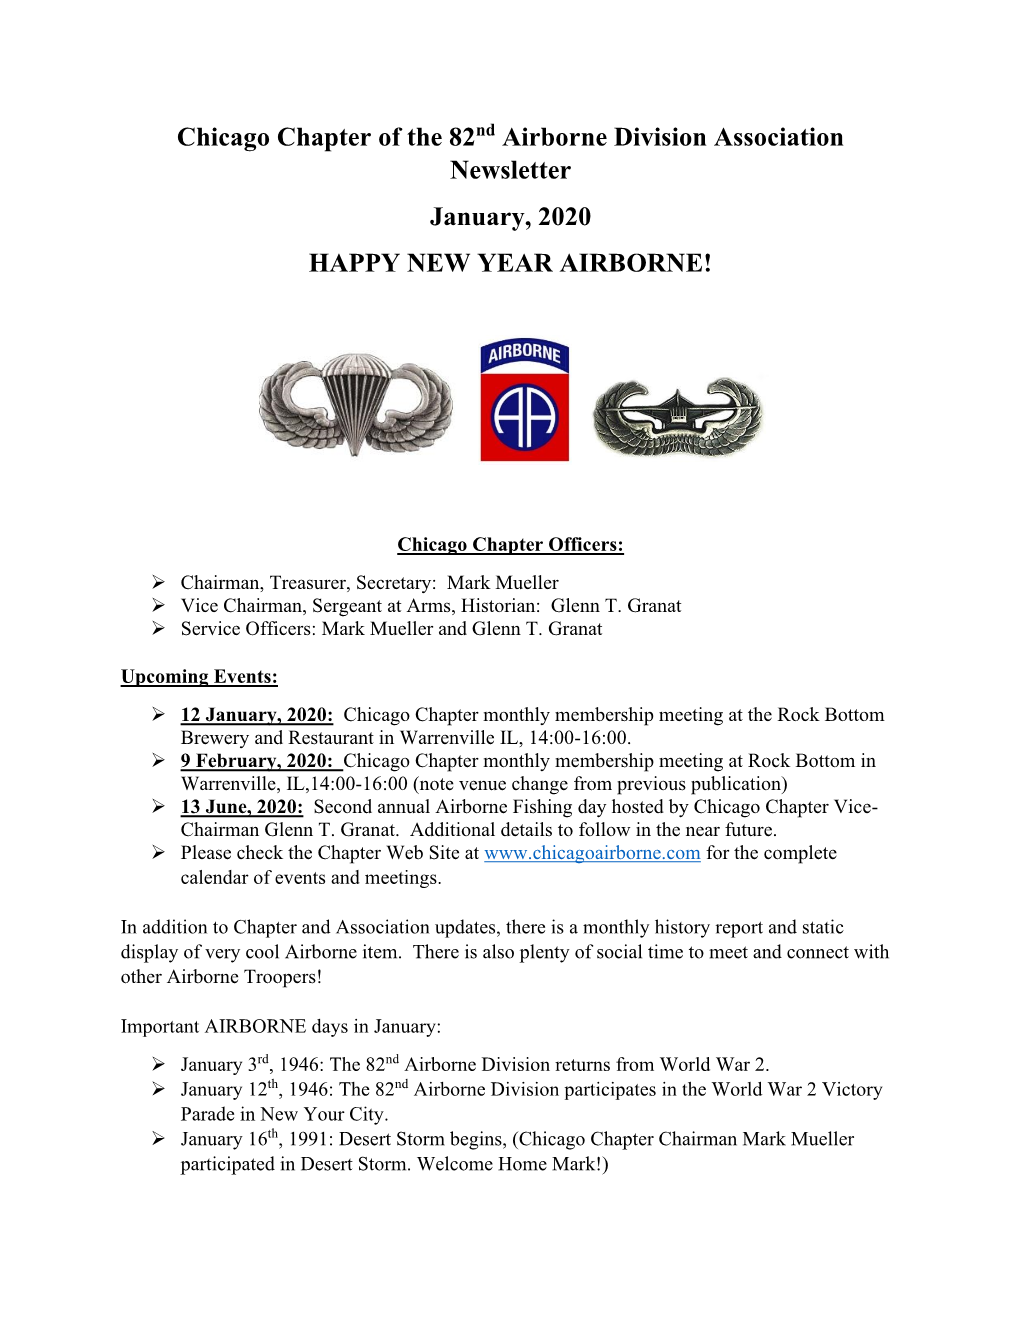 Chicago Chapter of the 82Nd Airborne Division Association Newsletter January, 2020 HAPPY NEW YEAR AIRBORNE!